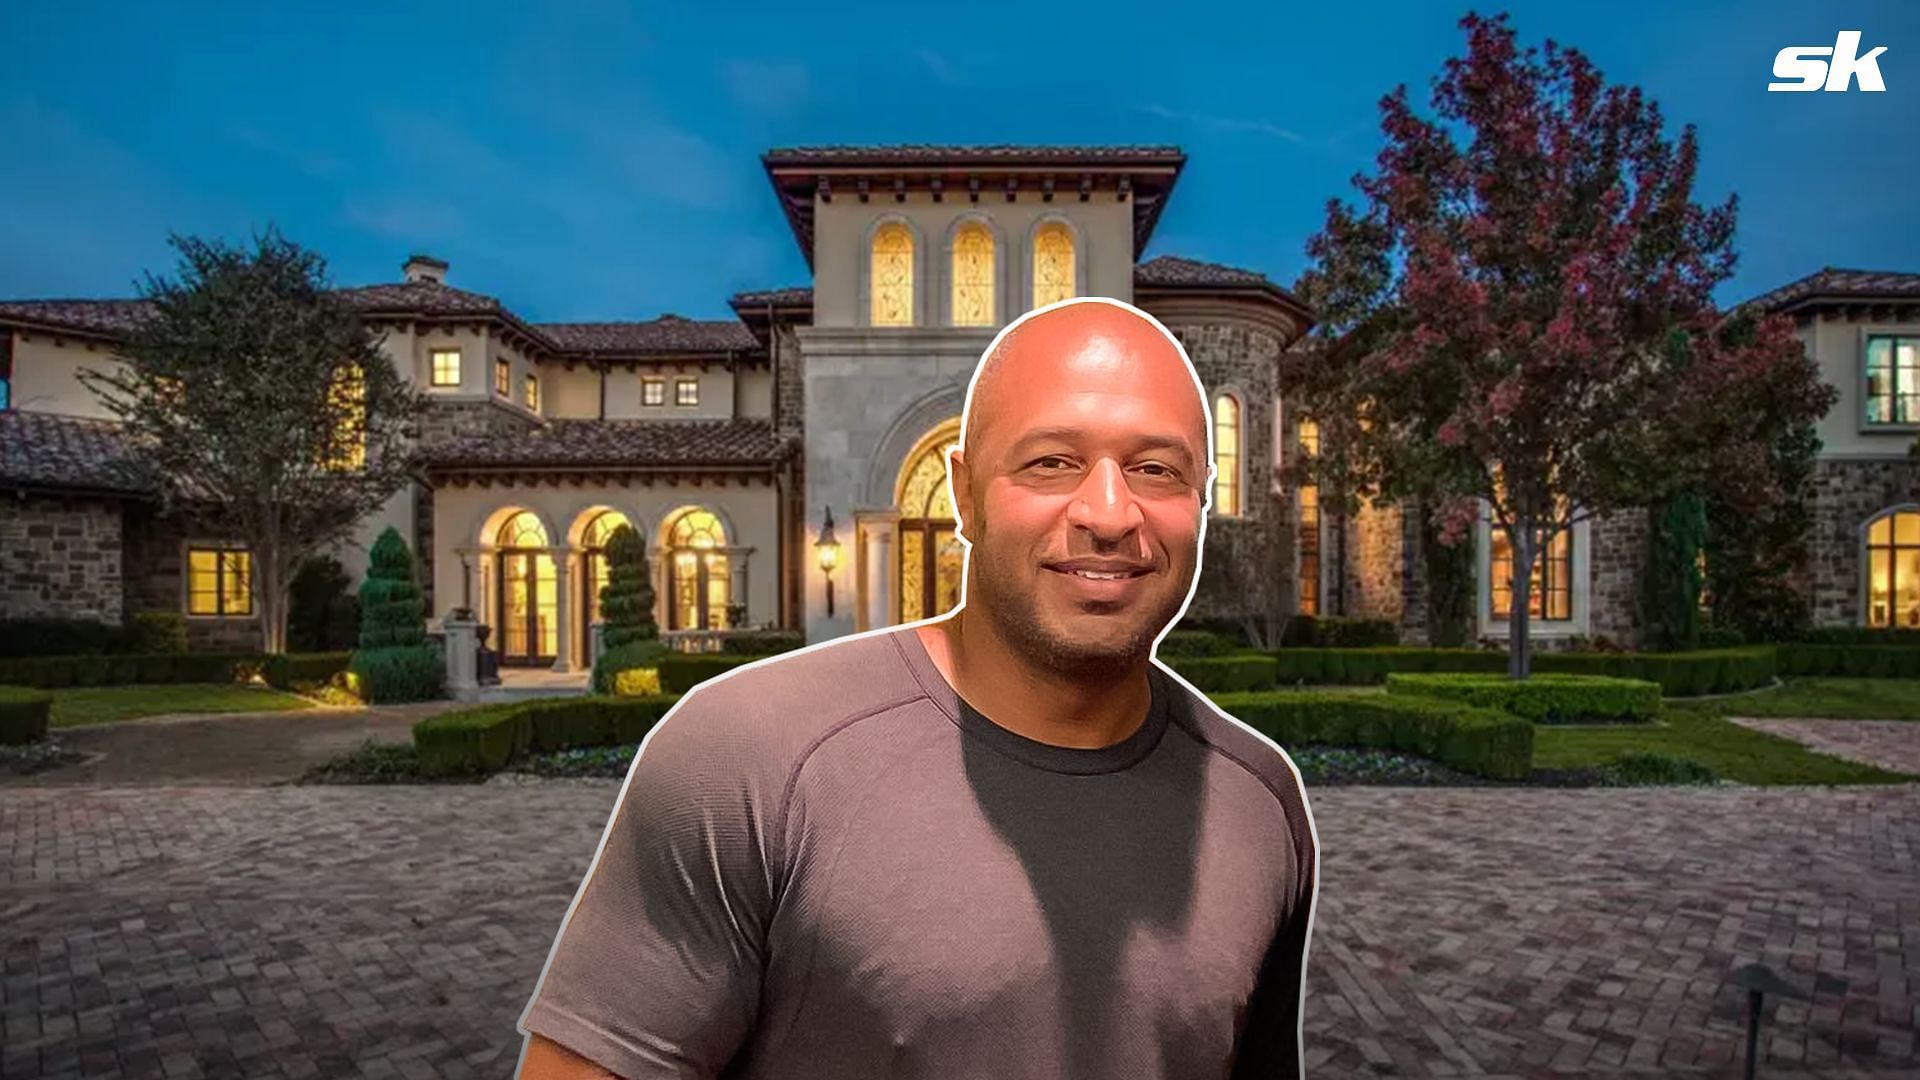 Former Blue Jays star Vernon Wells is living the dream at his Texas home